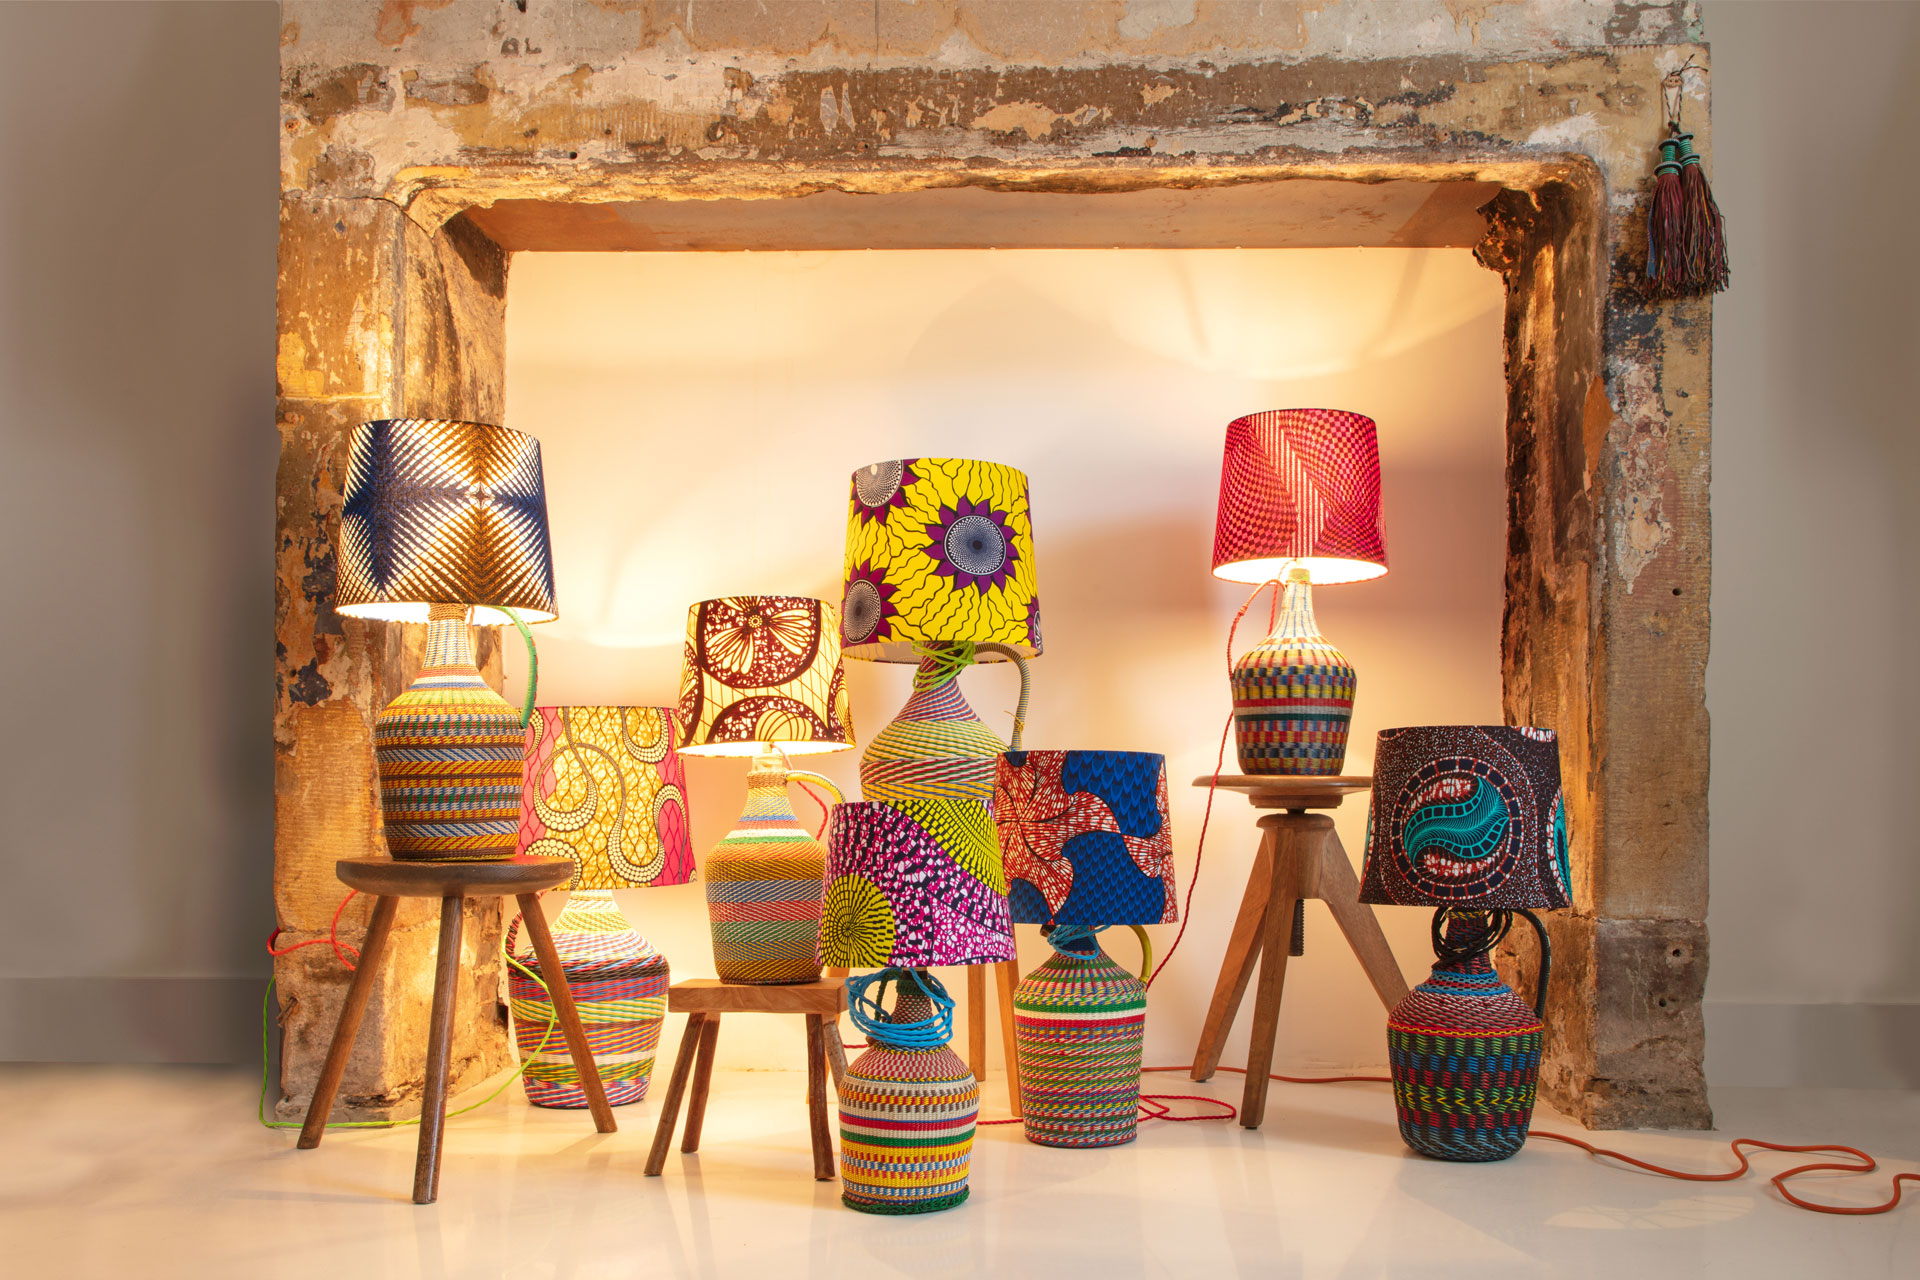 Upcycled homeware - Old glass bottle lamps and handwoven shades, £169 a set, re-foundobjects.com